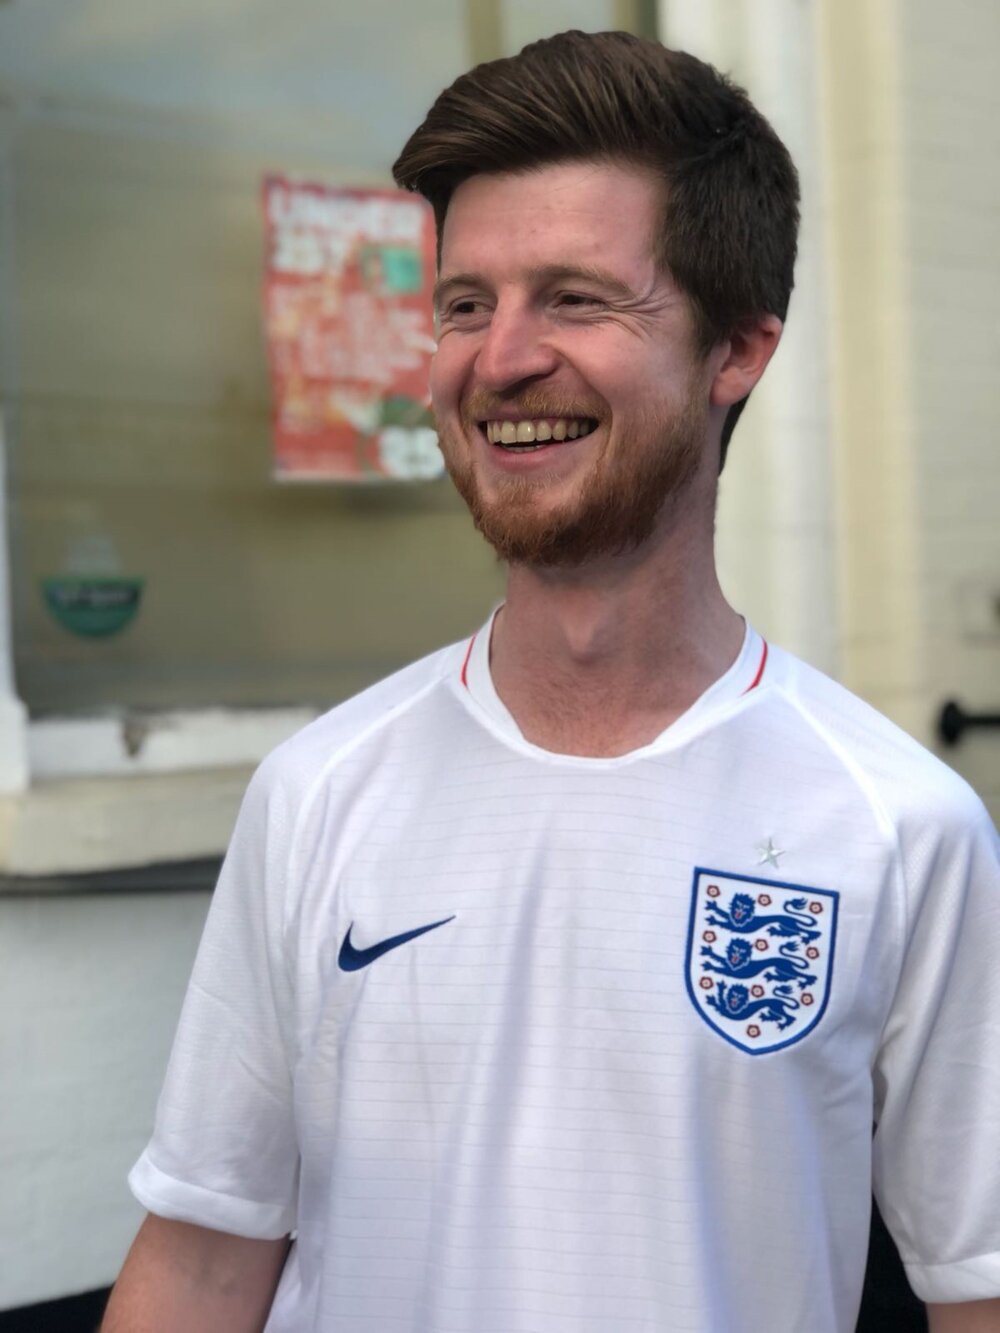 Alex taking in an England victory during the 2018 World Cup. Photo supplied